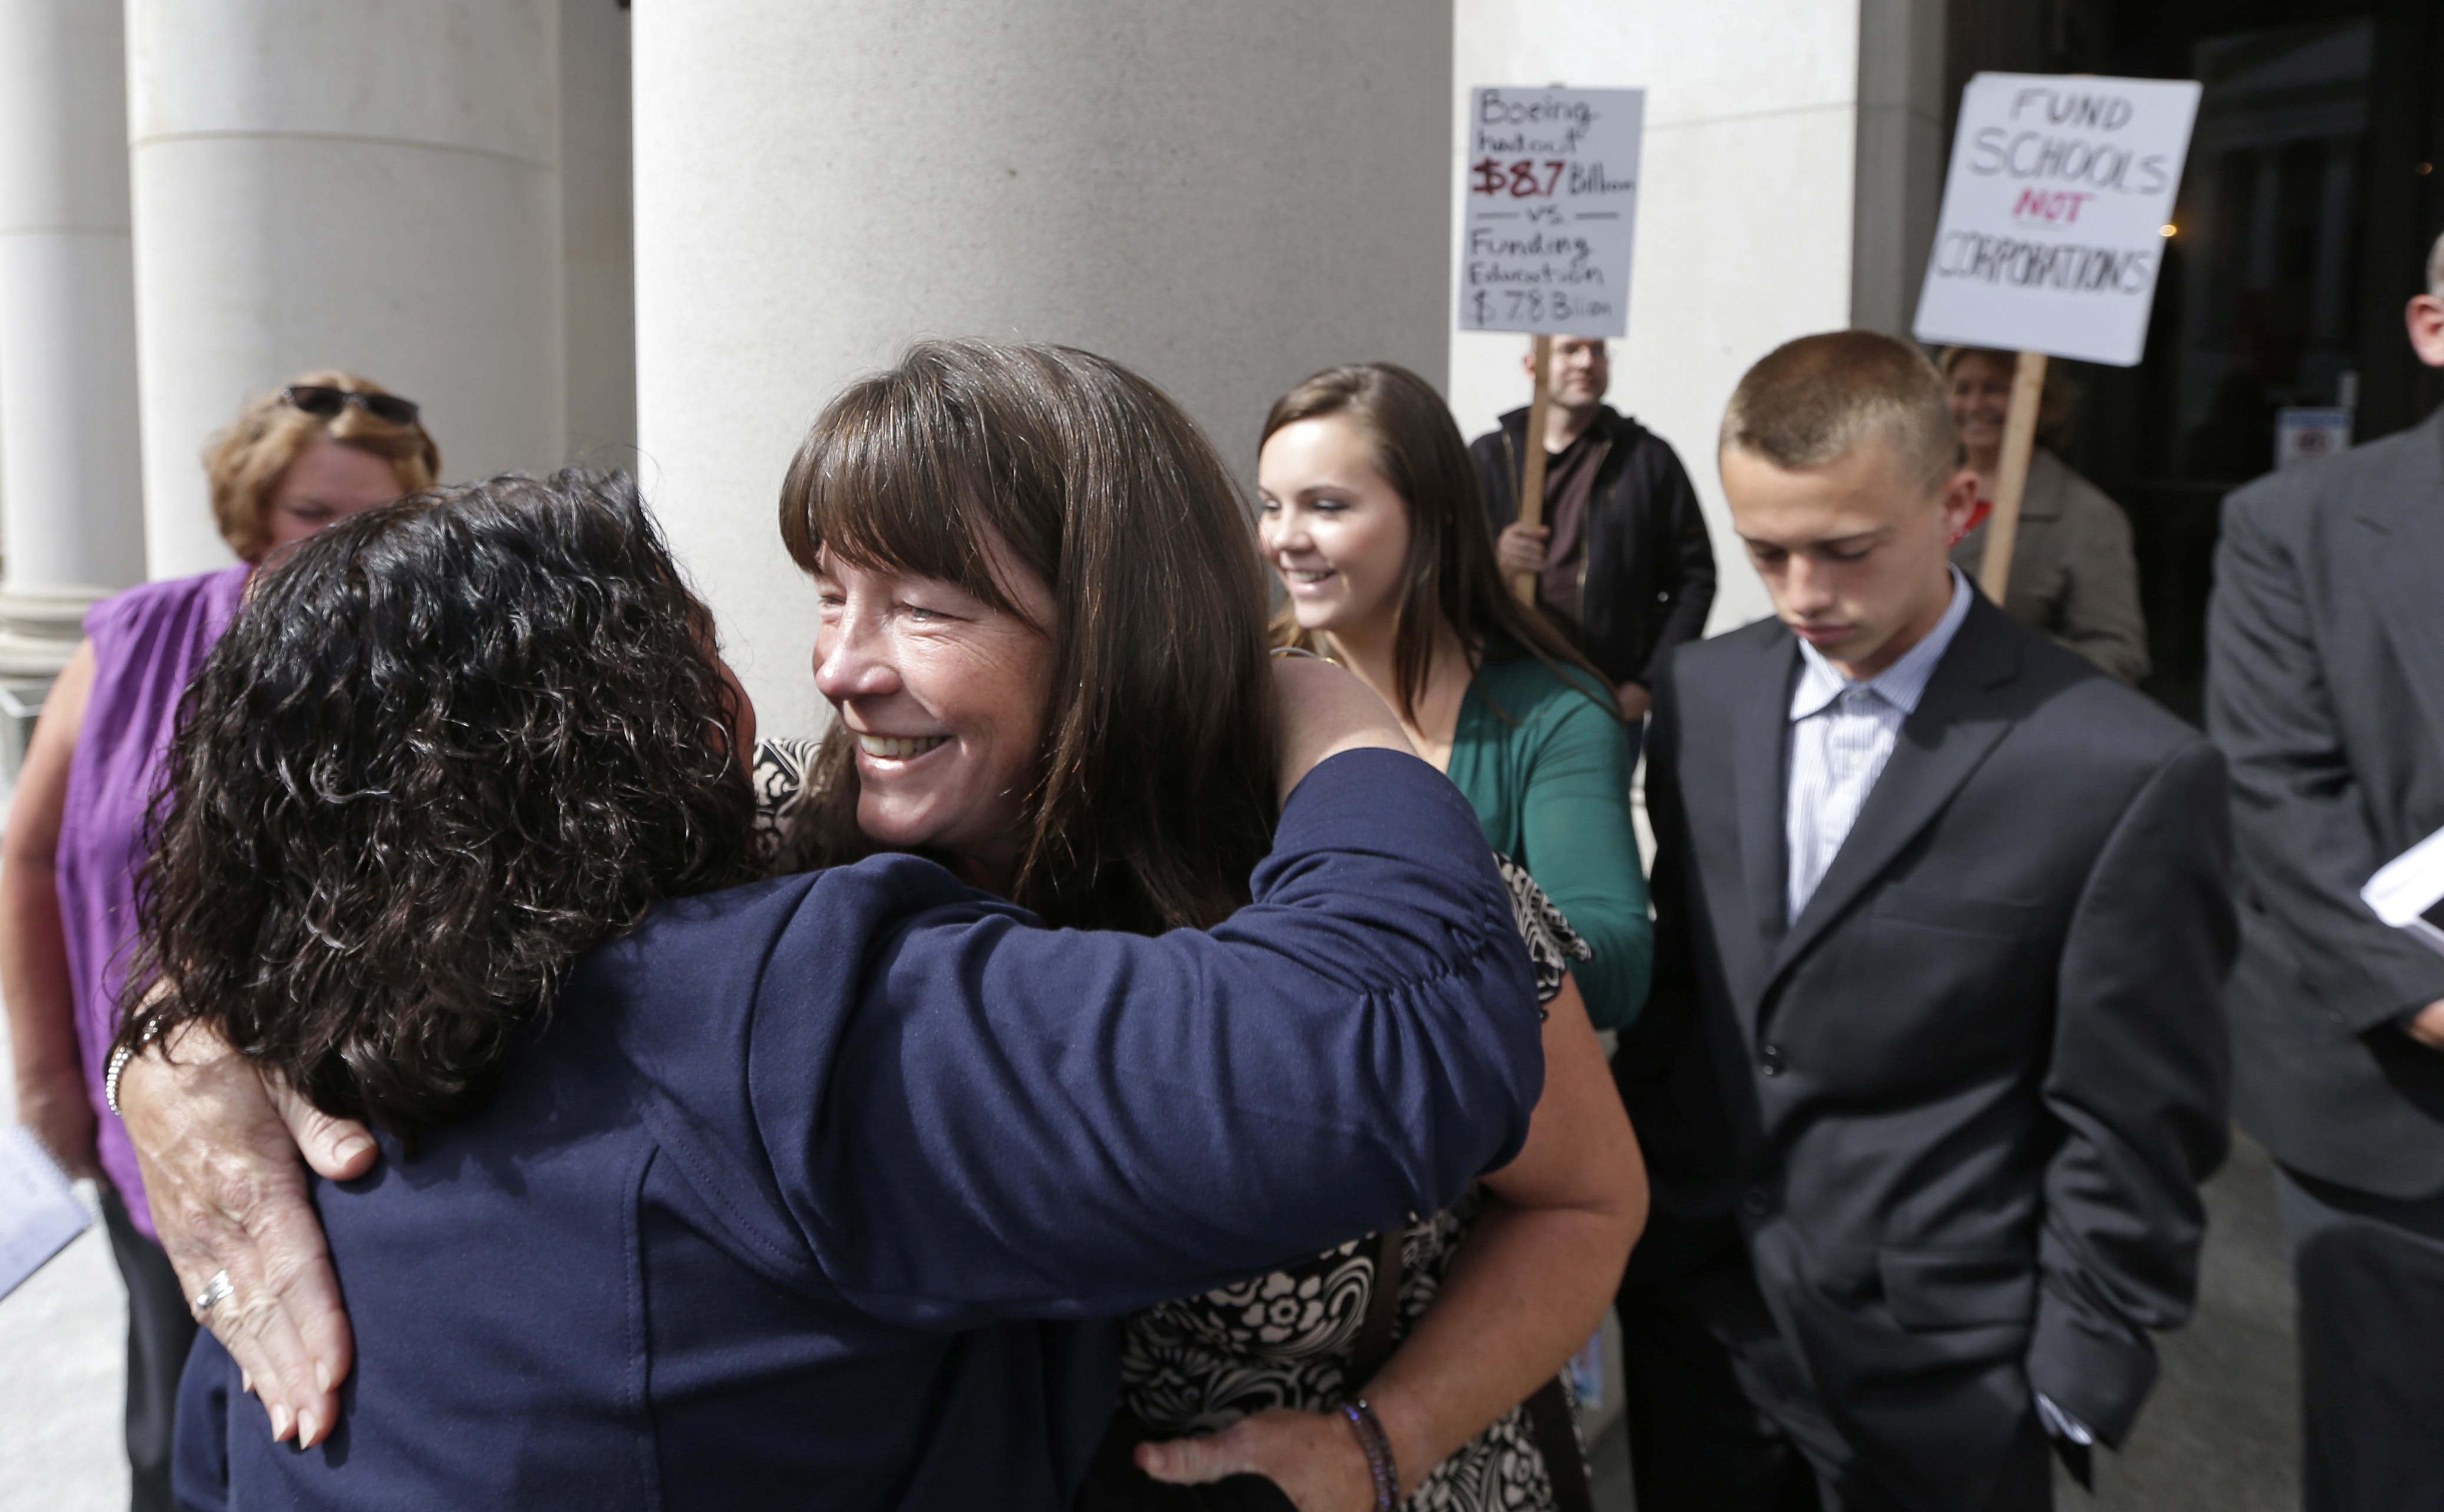 Plaintiff Stephanie McCleary, with her children Kelsey, then 20, and Carter, 15, right, behind, is embraced after a Sept. 3, 2014, hearing at the state Supreme Court in Olympia. Carter was in second grade when his family and others sued the state to adequately fund K-12 education; he is now in 11th grade.